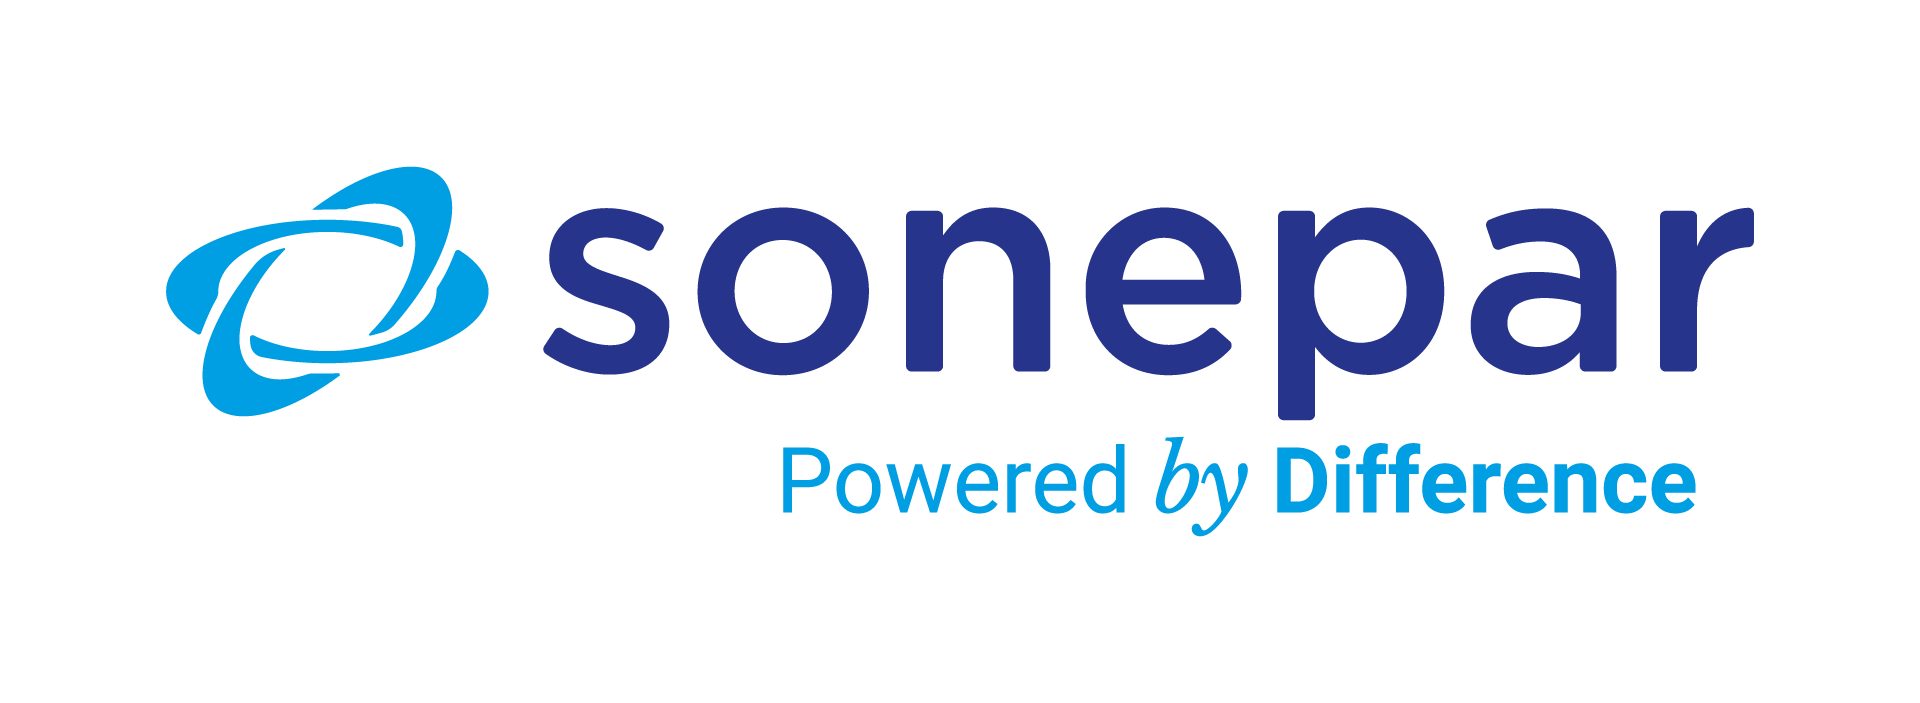 Sonepar. Powered by Difference.